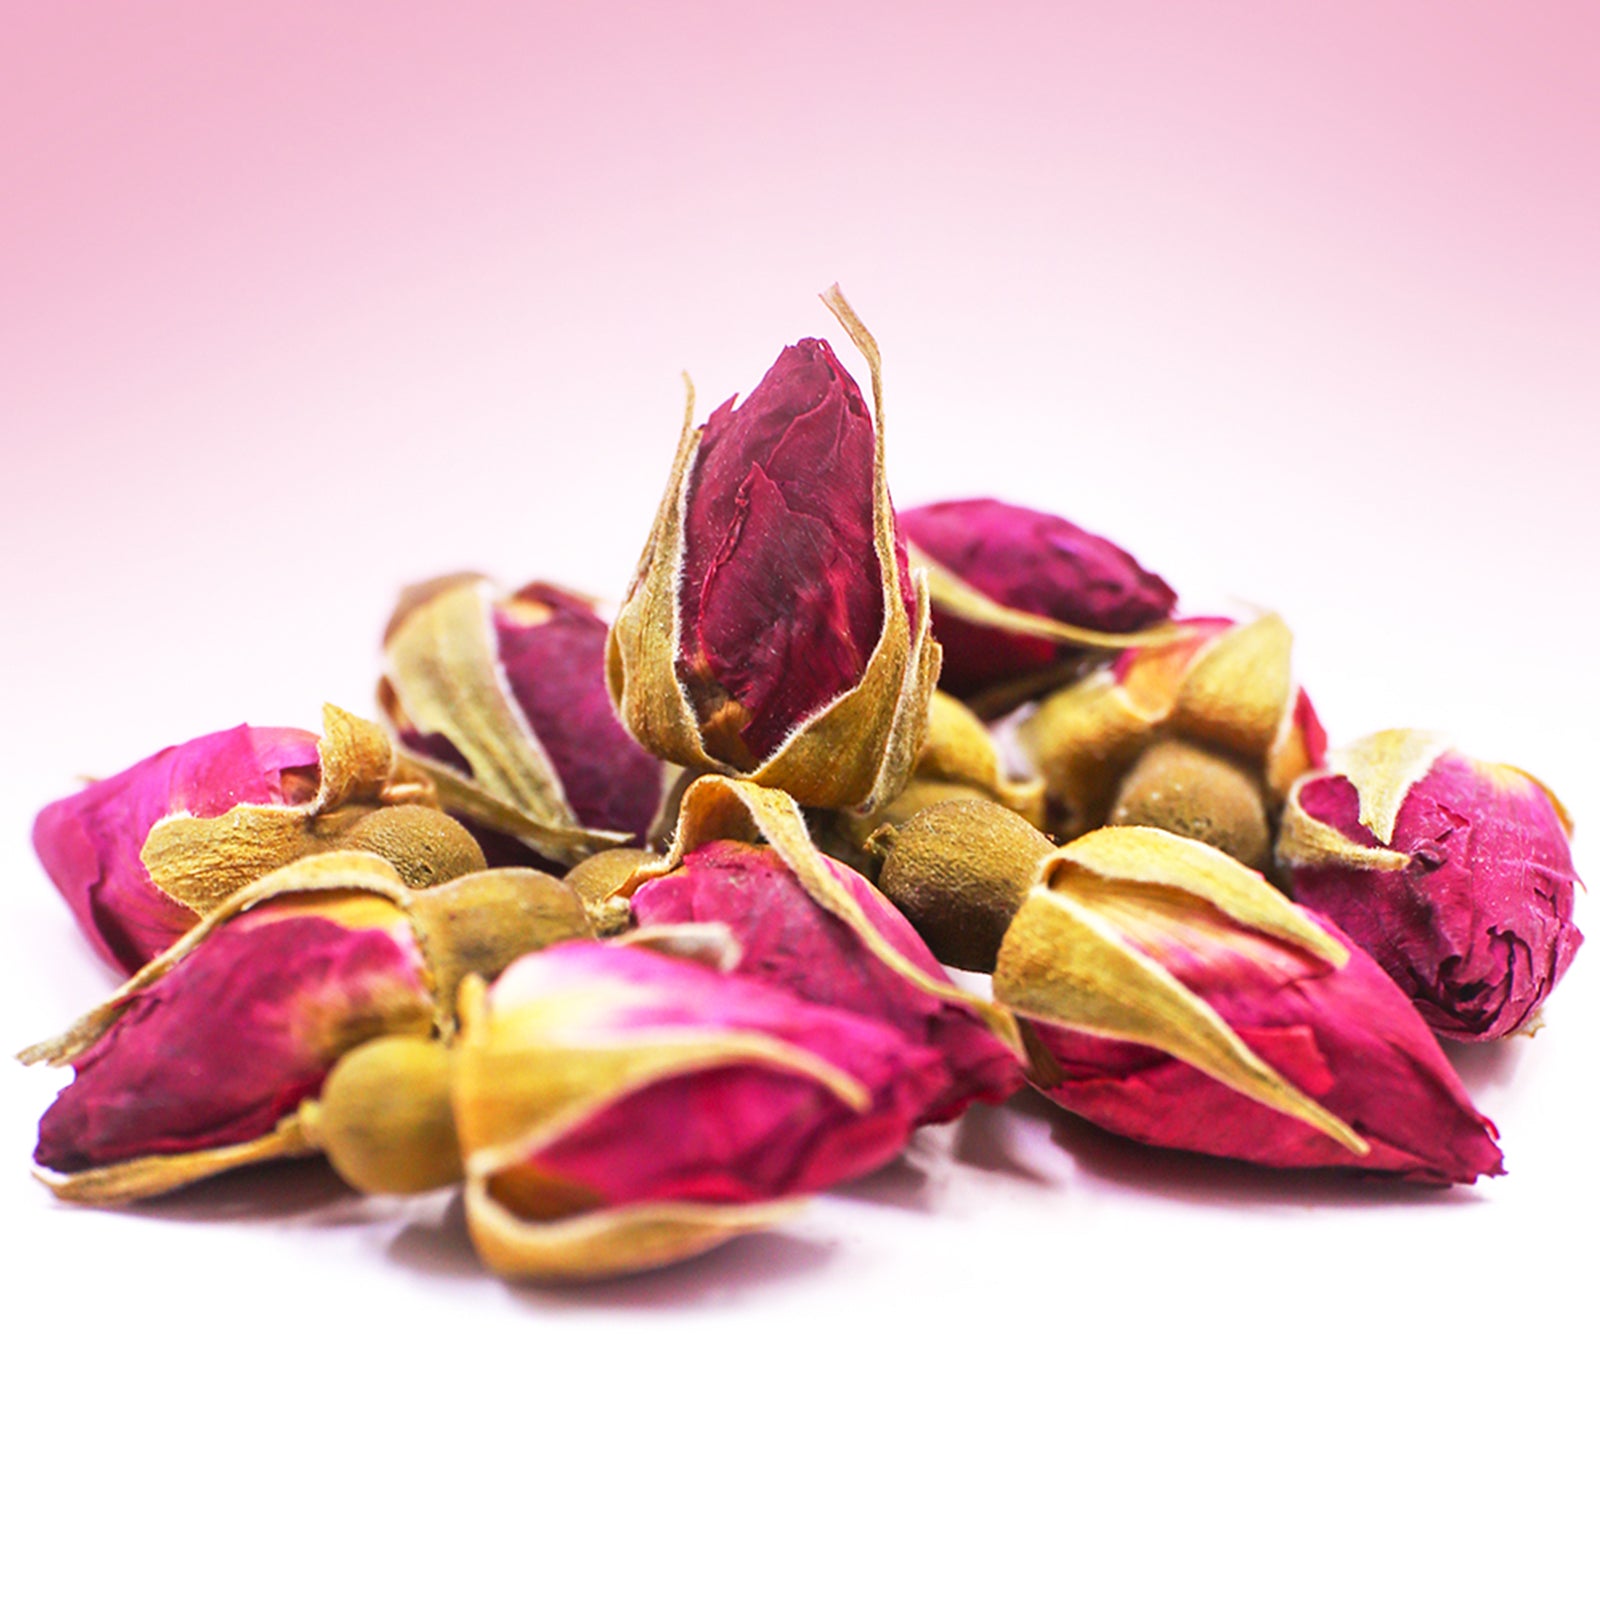 Dried Roses, 3oz